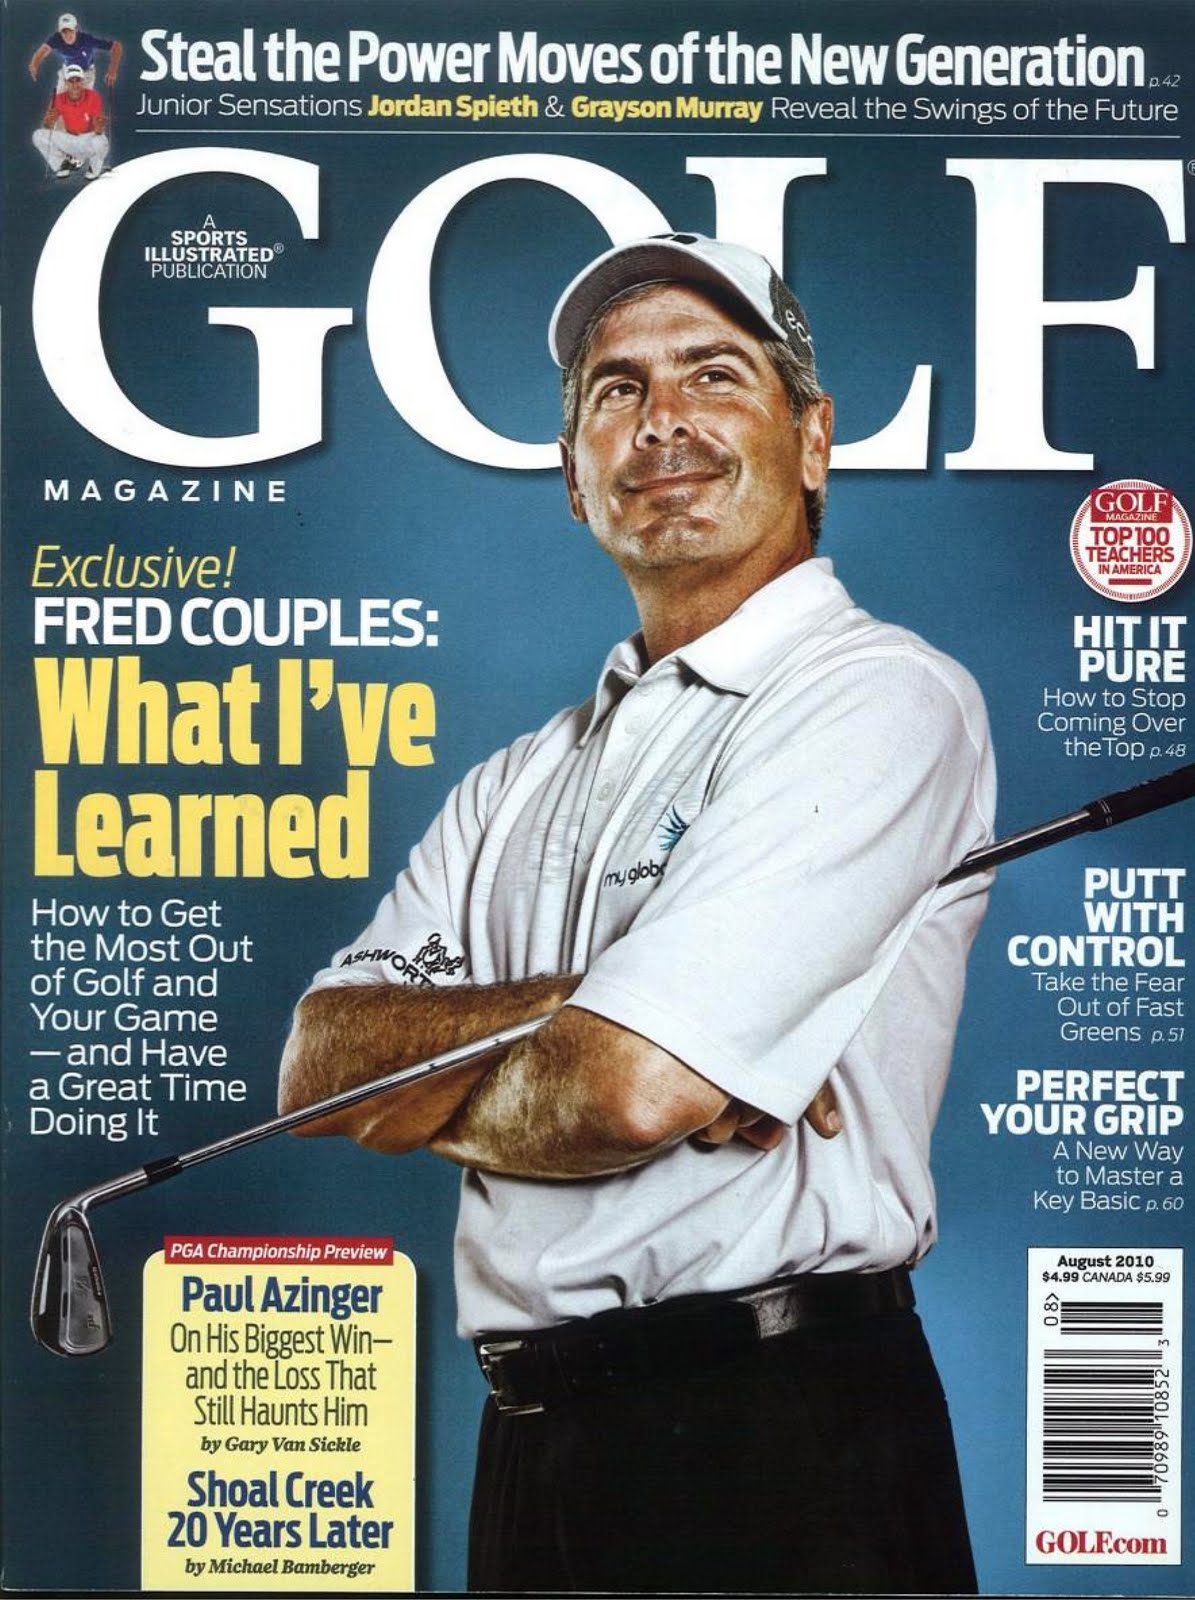 The Coast With the Most (By: Golf Magazine) | PUNTACANA NEWS - A ...